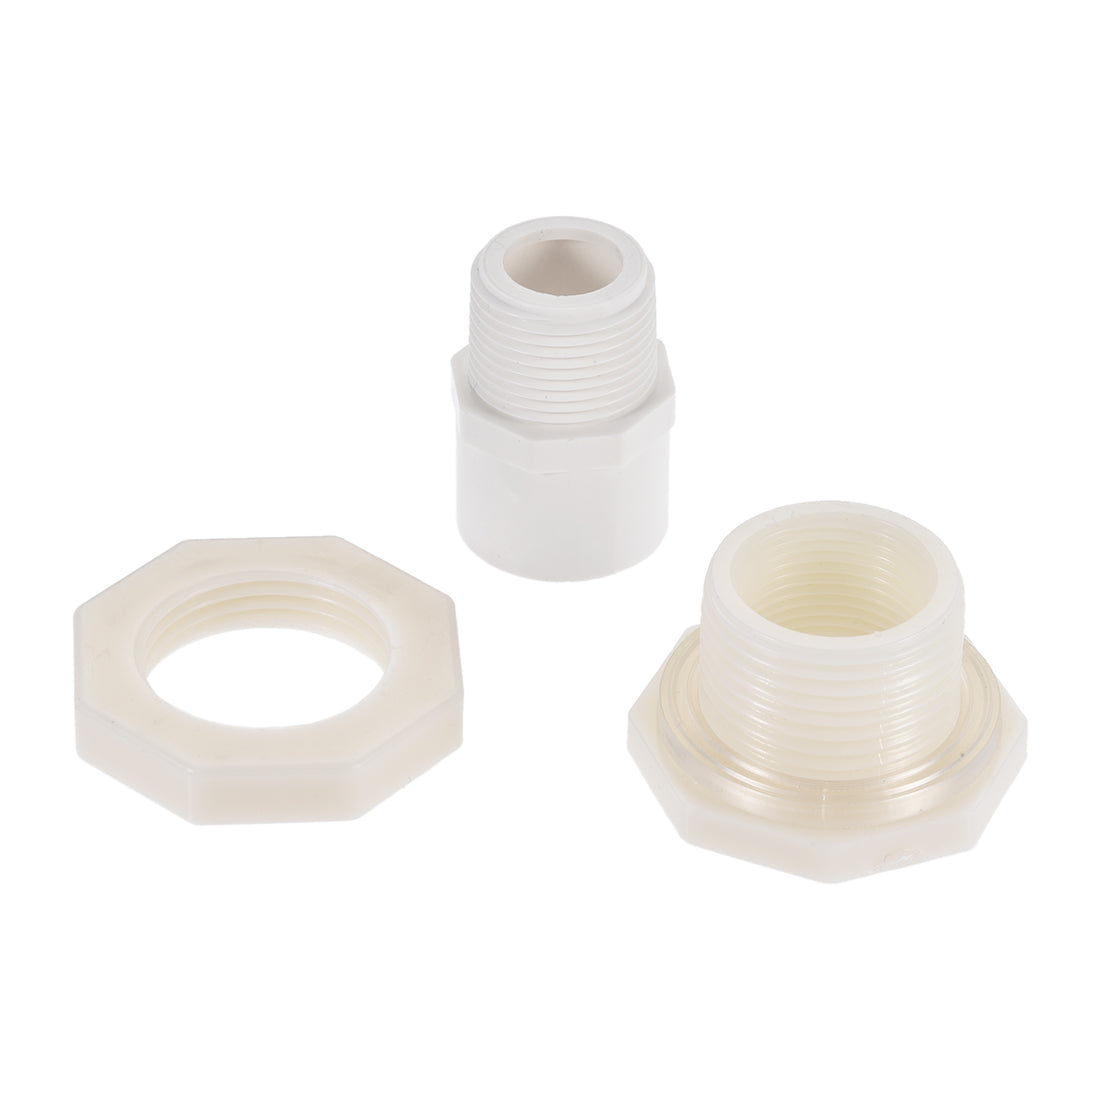 uxcell Uxcell Bulkhead Fitting, G3/4 Female 1.38" Male, Tube Adaptor Fitting, with Silicone Gasket and Pipe Connector, for Water Tanks, PVC, White